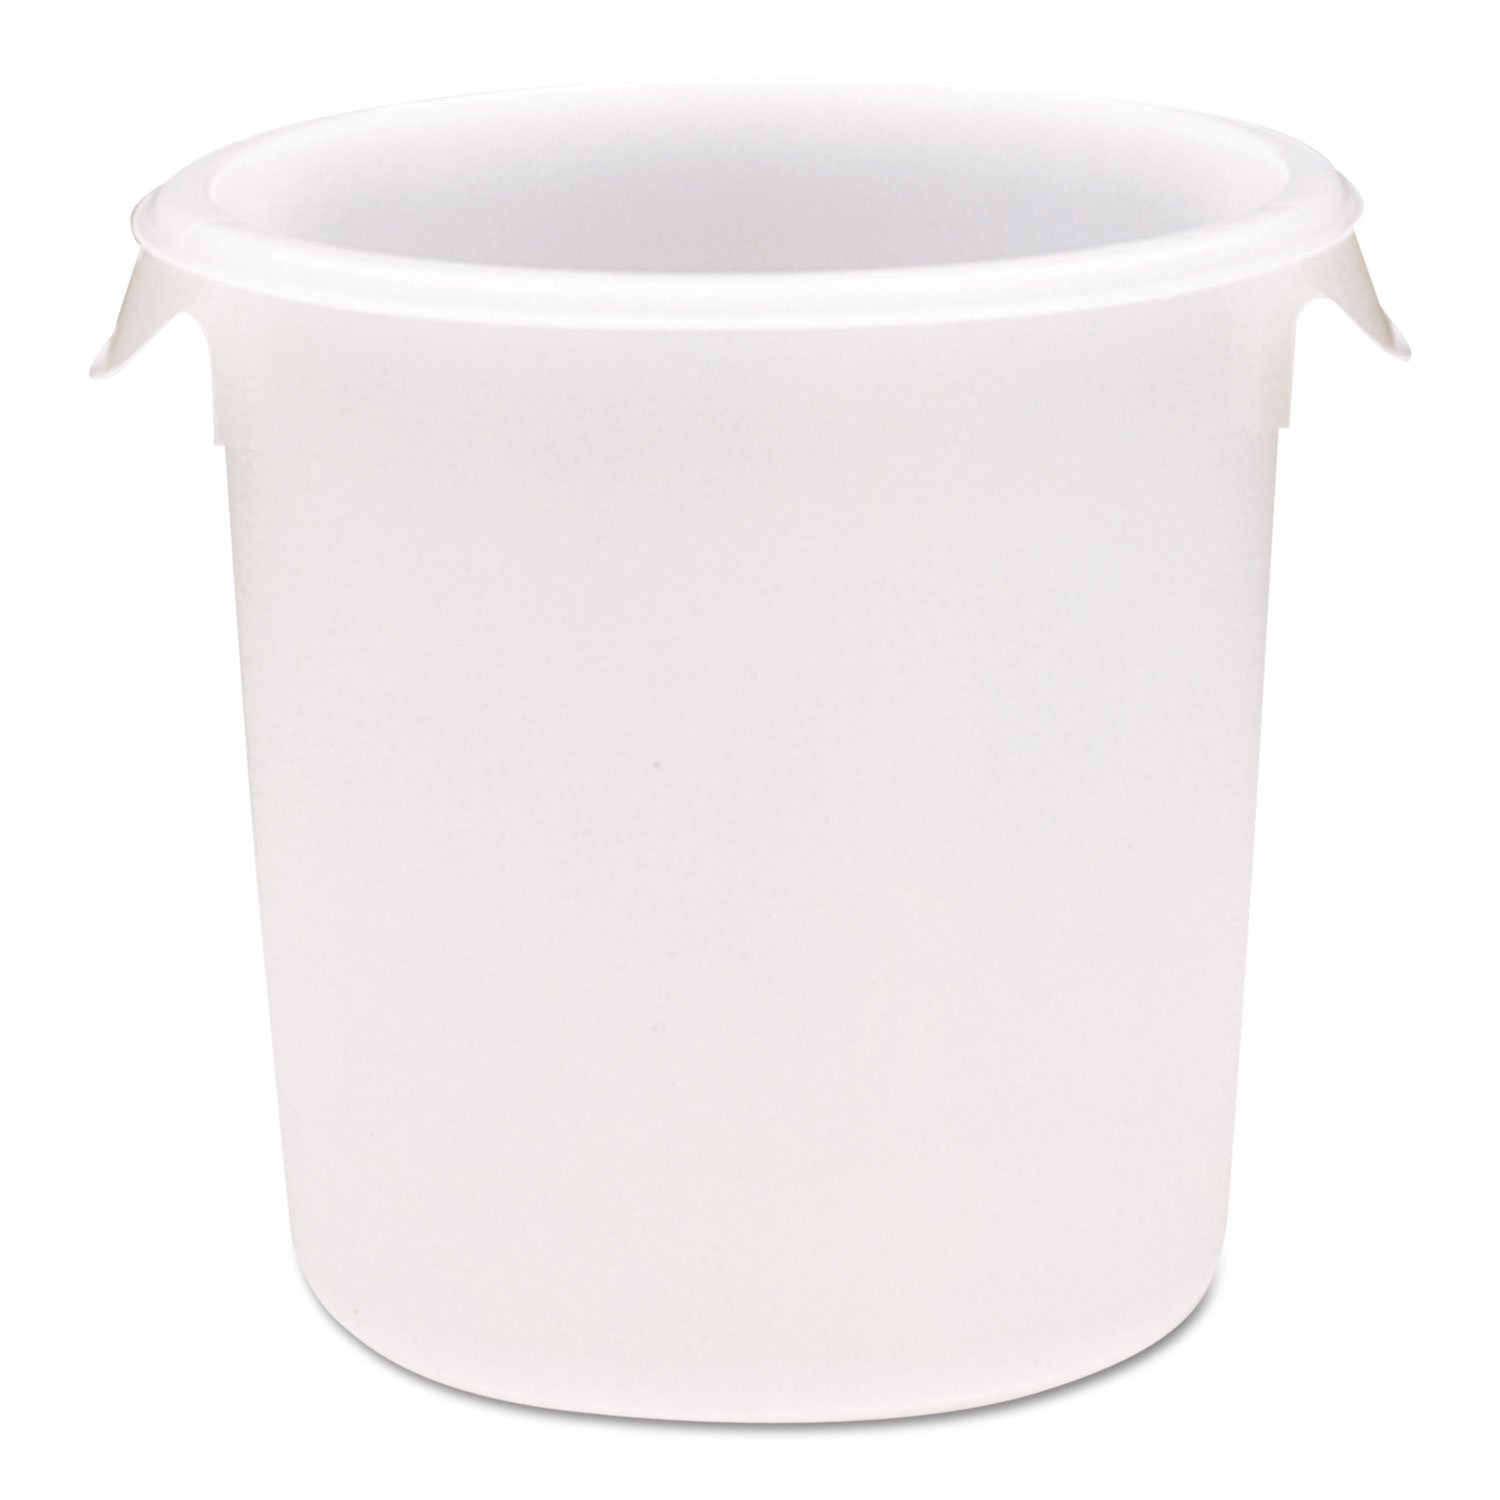  Rubbermaid Commercial FG572400WHT Round Storage Containers, White, 8 qt, 10 5/8d x 10dia, Polypropylene (RCP5724WHI) 